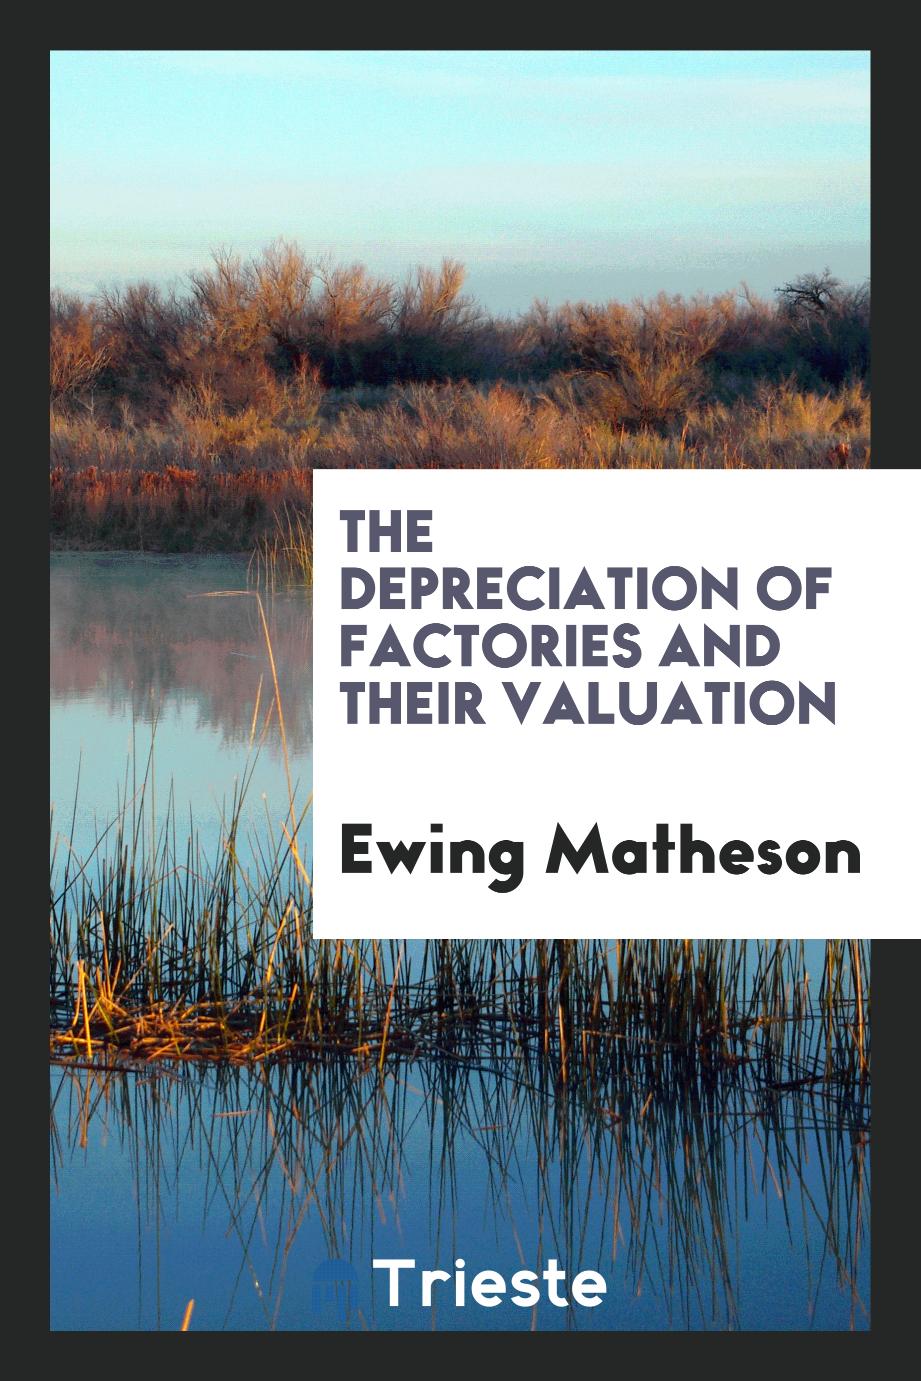 Ewing Matheson - The Depreciation of Factories and their Valuation